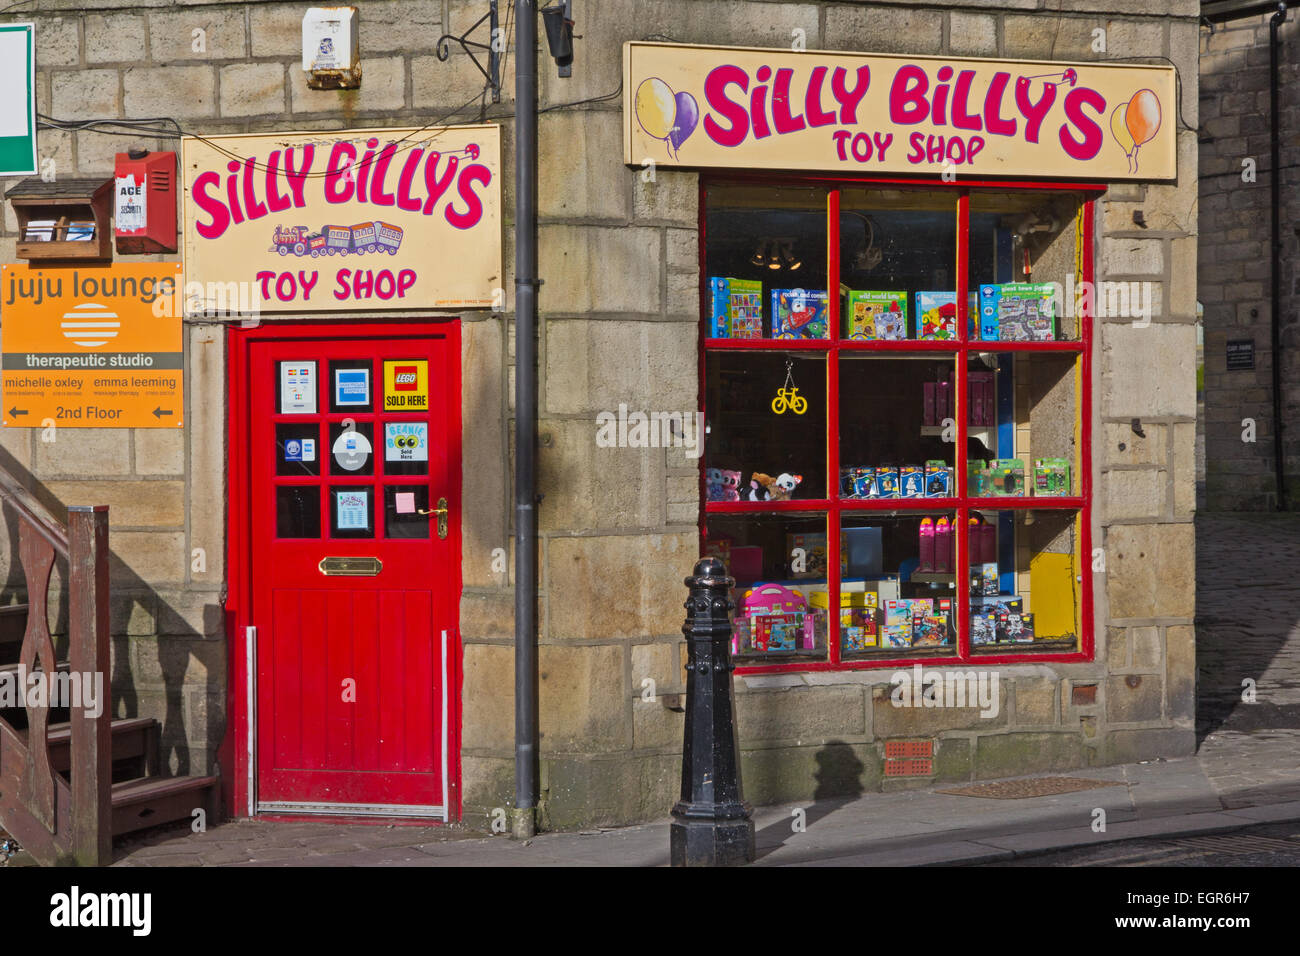 Silly Billy's toy shop, Hebden Bridge, West Yorkshire Stock Photo